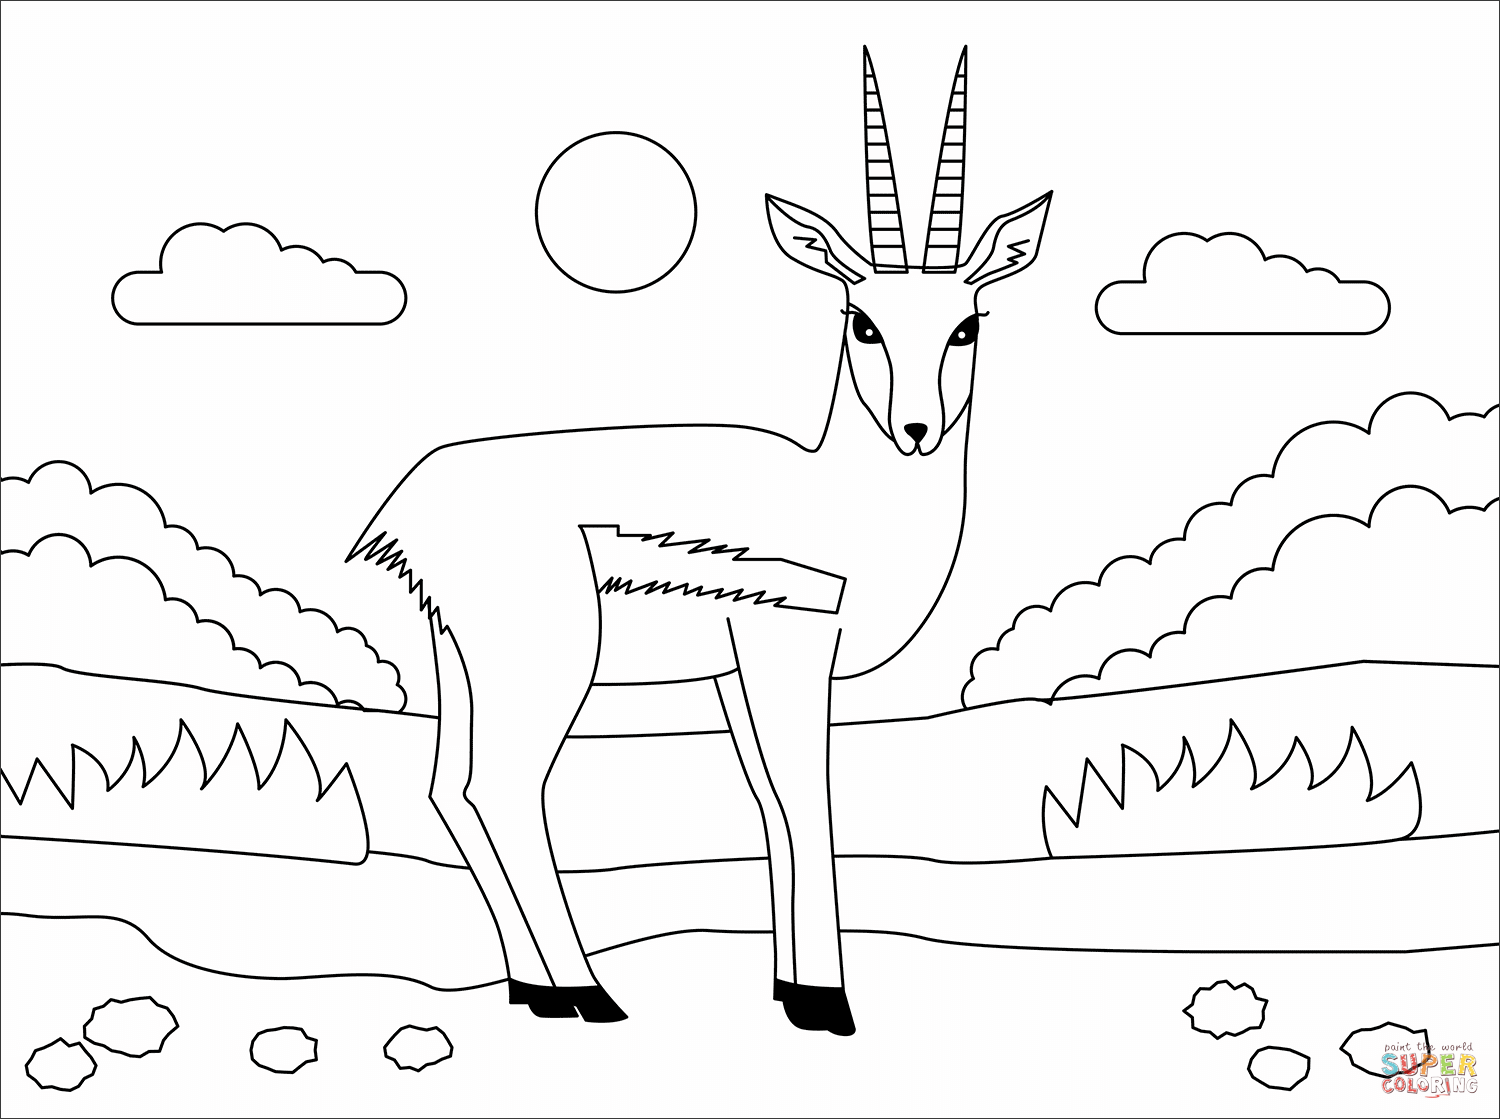 Gazelle coloring page | Free Printable Coloring Pages